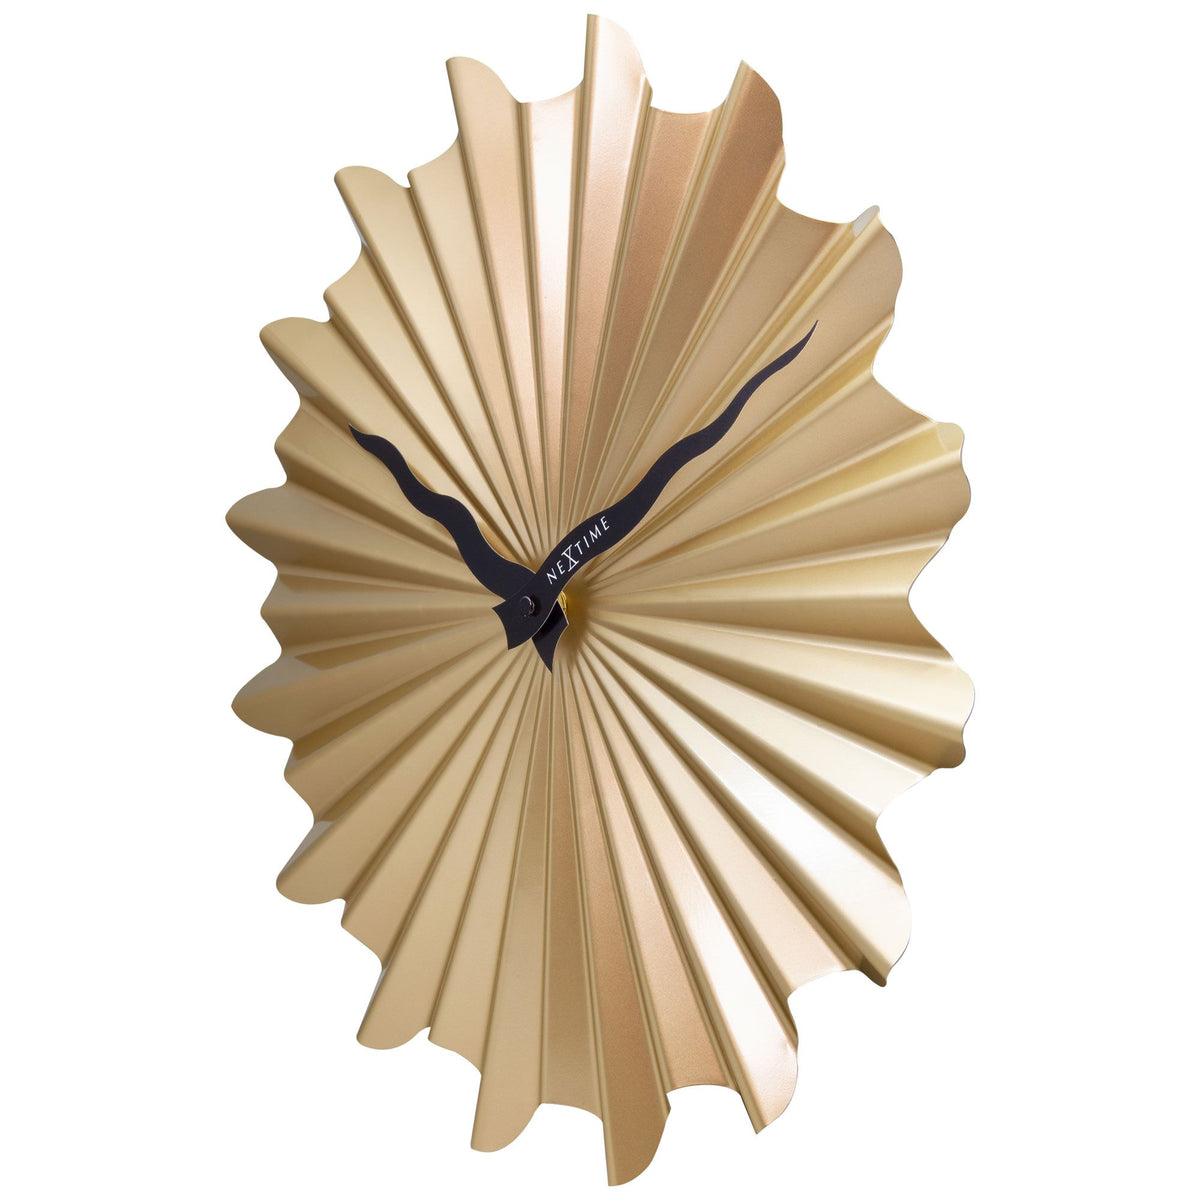 NeXtime Sunny Wall Clock in Gold - 40cm - Notbrand